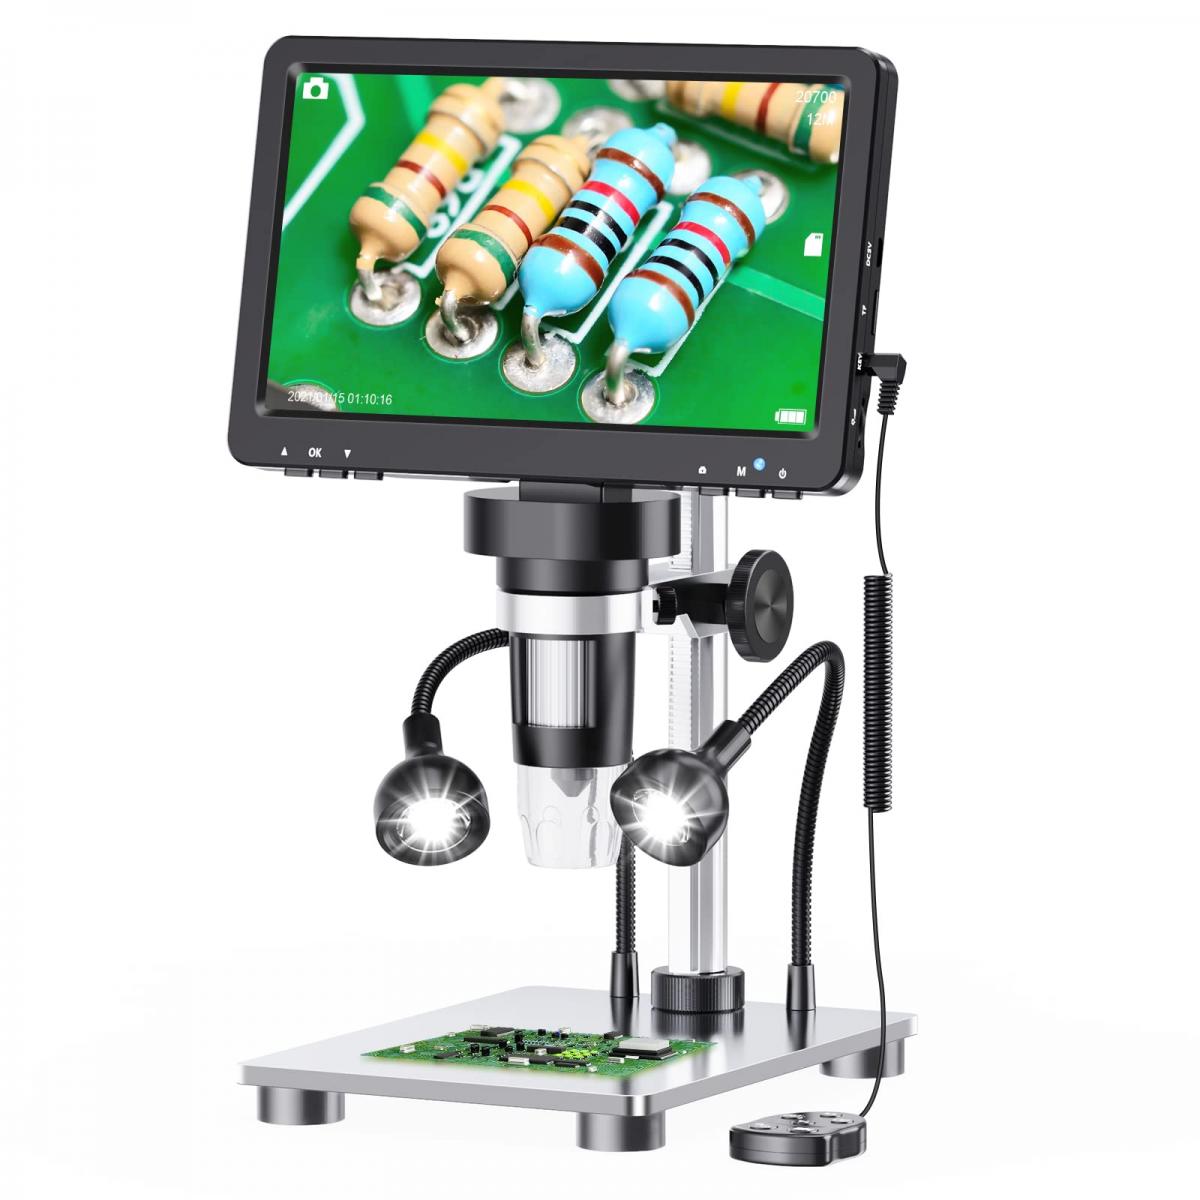 Leipan DM9H HDMI Coin Microscope with 7 IPS Screen,1200X Magnification  Soldering Microscope,Longer 8.5 Stand,Digital Microscope with 32GB